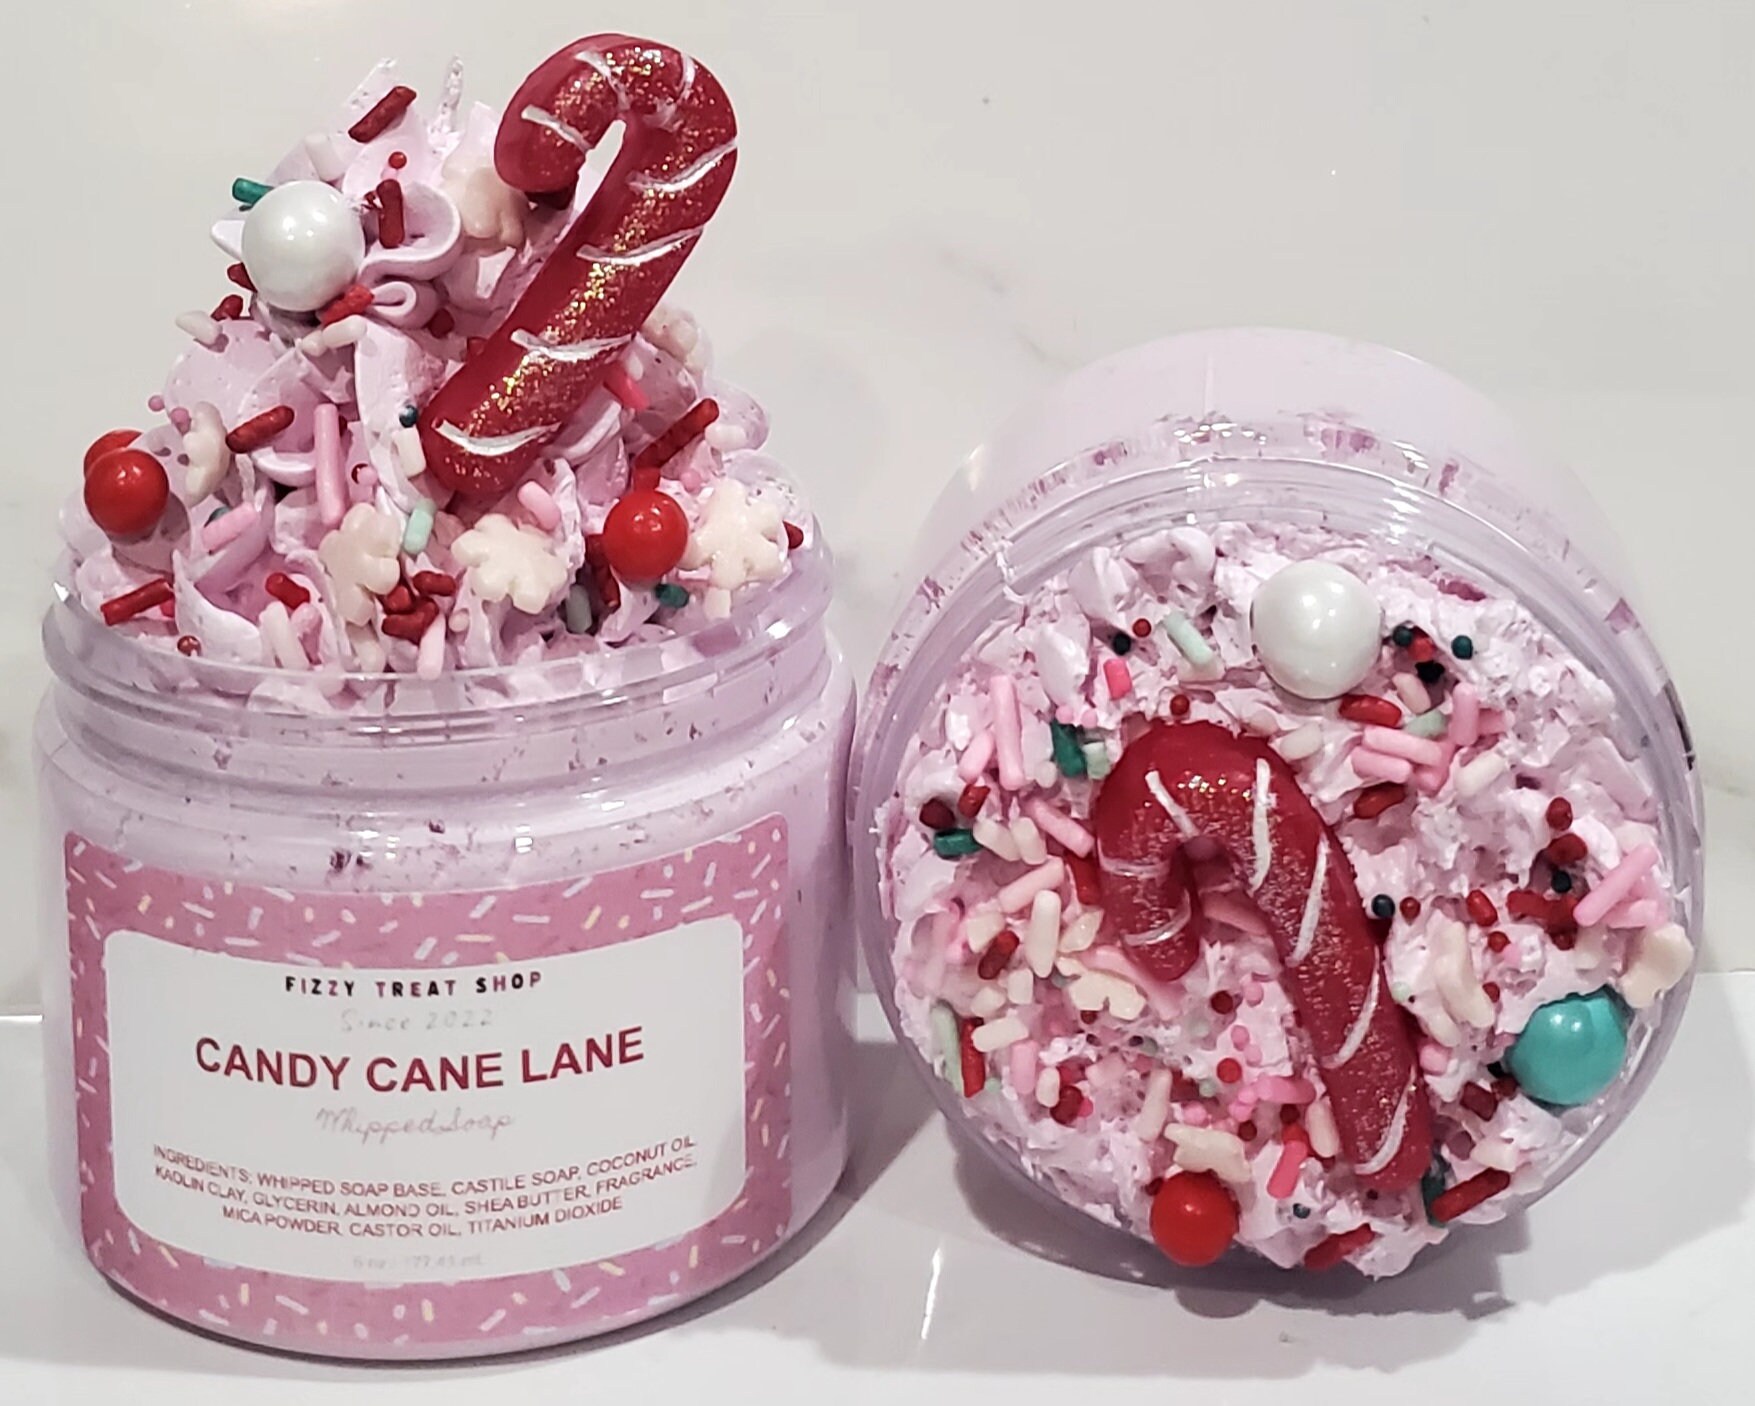 Candy Cane Lane 14 oz. Holiday Limited Edition Candle